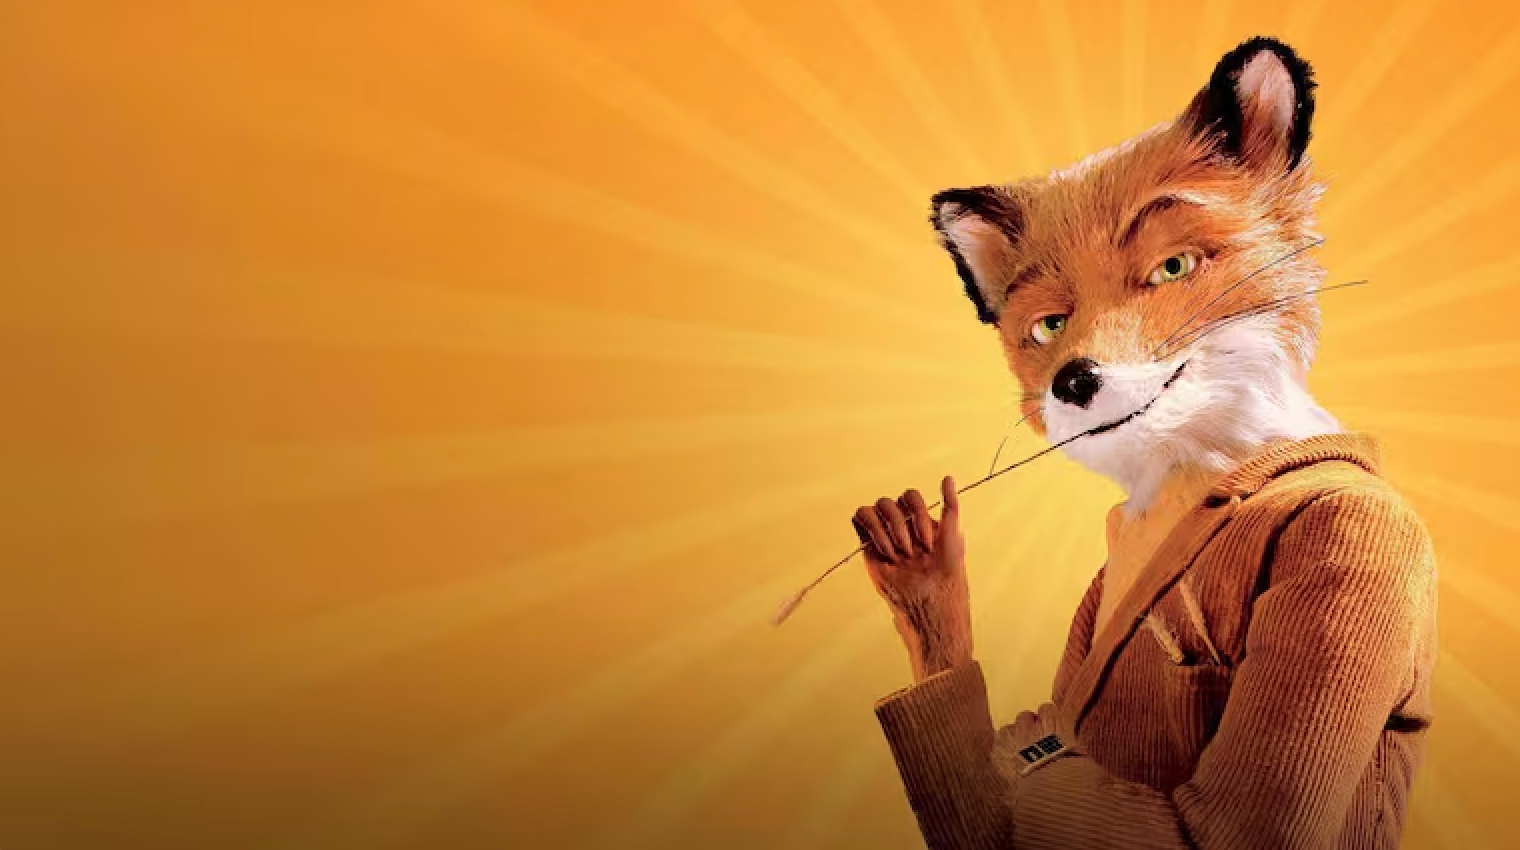 The Most Popular Movies to Fall Asleep to – Fantastic Mr. Fox Crowned Top 